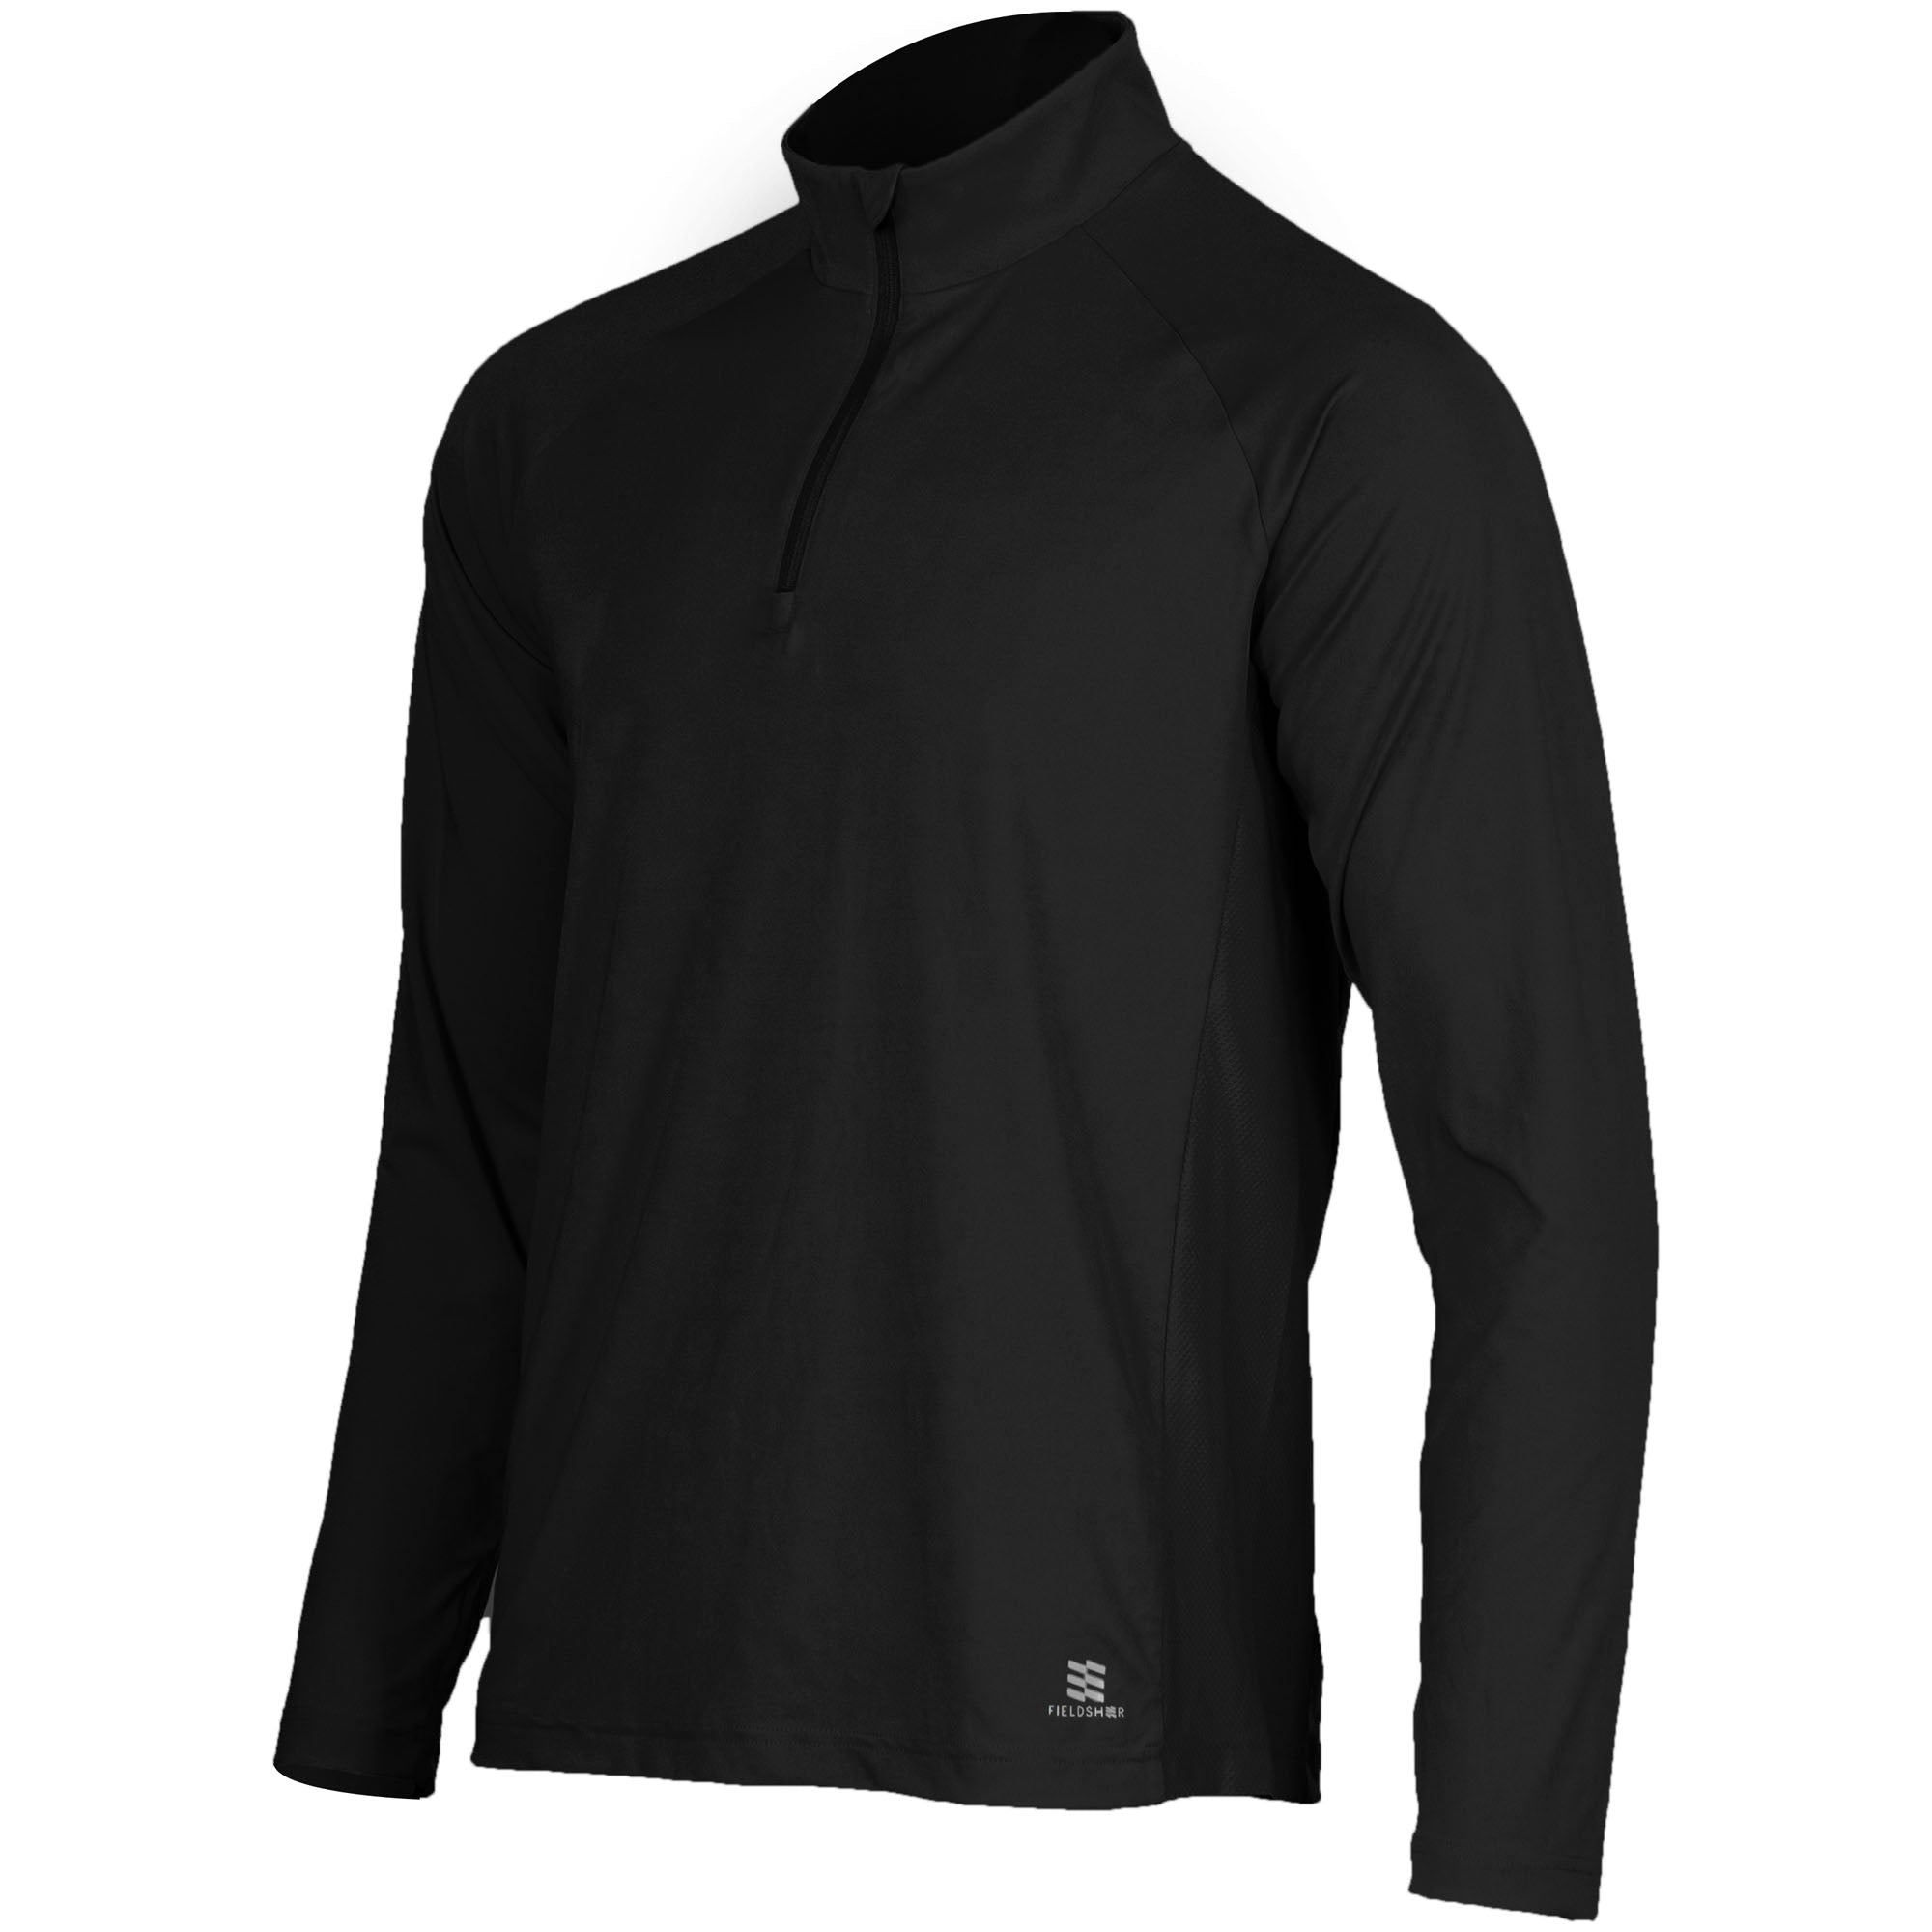  ATHLIO Men's Long Sleeve Athletic Shirts - Quick Dry, UV Sun  Protection, and 1/4 Zip Pullover Running Tops for Outdoor, Half-Zip 3pack  Black/Carbon Grey/White, X-Small : Clothing, Shoes & Jewelry